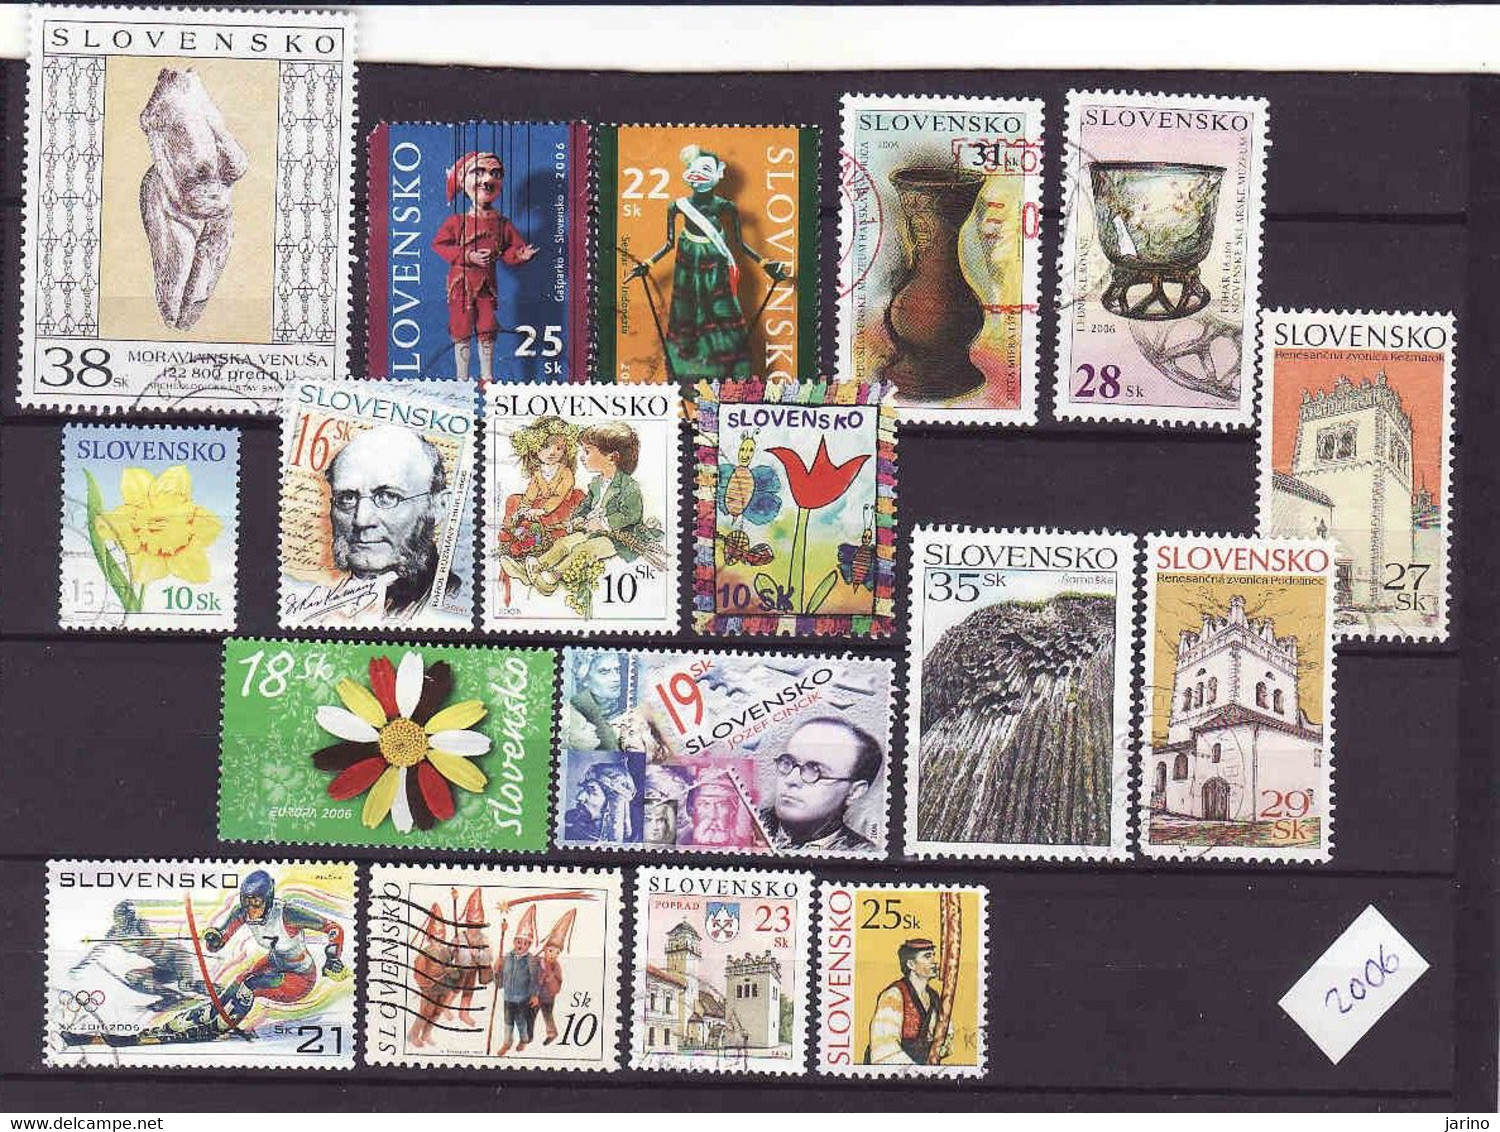 Slovakia-Slovaquie 2006, Used. I Will Complete Your Wantlist Of Czech Or Slovak Stamps According To The Michel Catalog. - Oblitérés